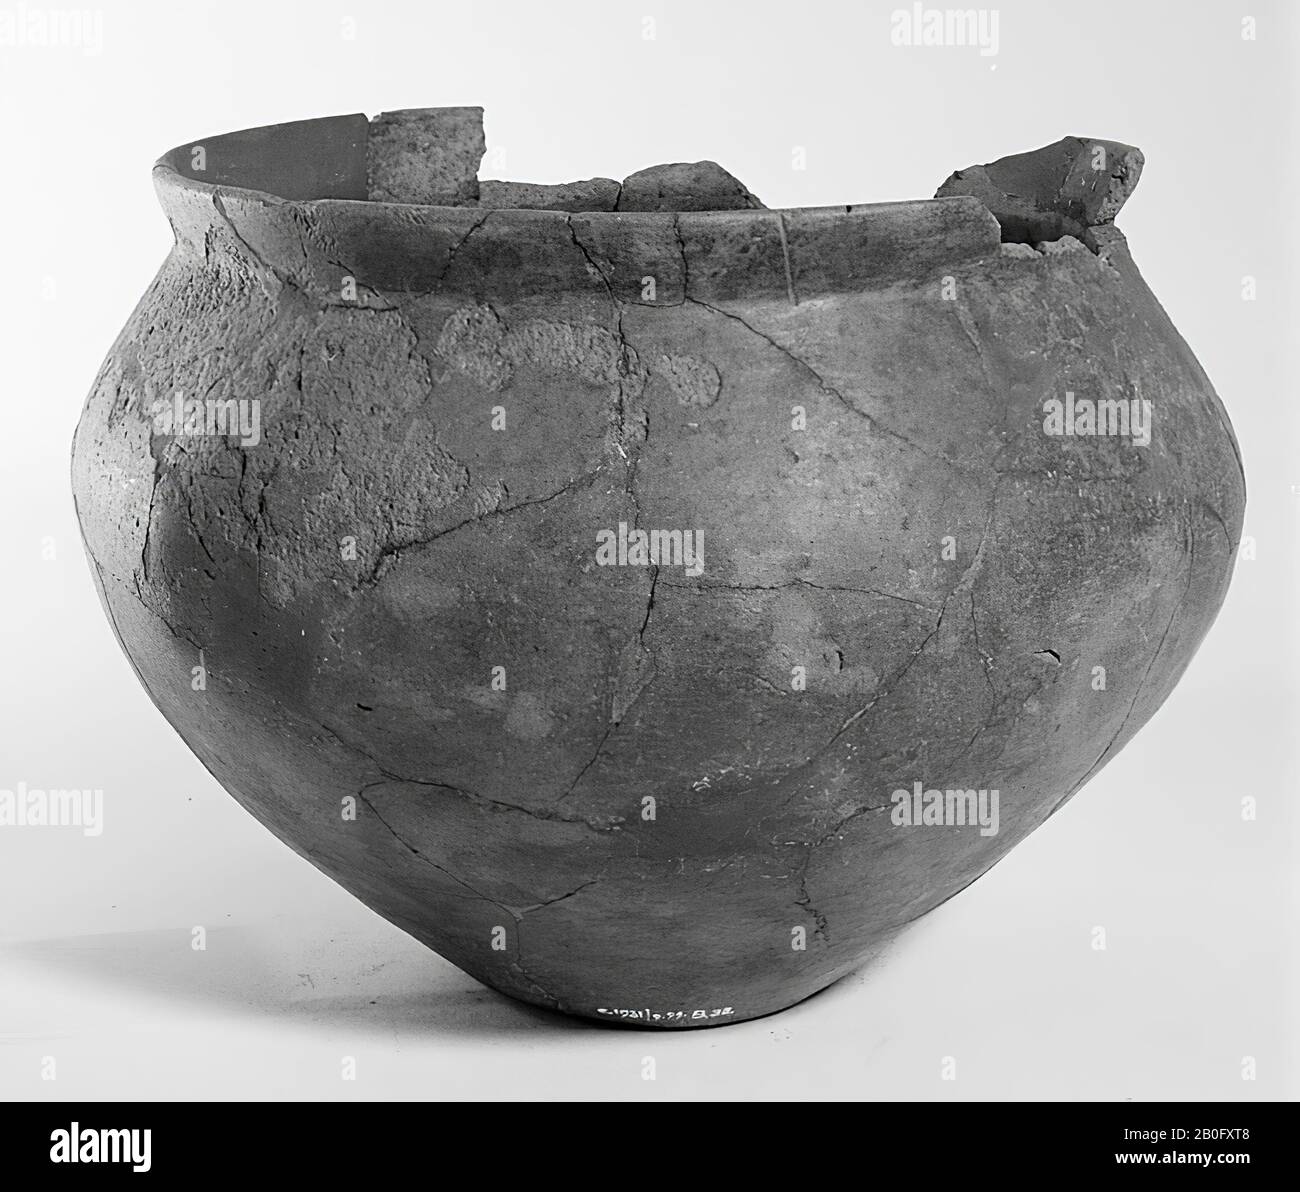 Gallo-Germanic urn of earthenware without decoration. Edge defect. Unstable old bonding and additions, cracks, surface damage, 2 separate fragments. Contains cremated residues, urn, earthenware, h: 18.5 cm, diam: 25 cm, prehistory -1200 Stock Photo